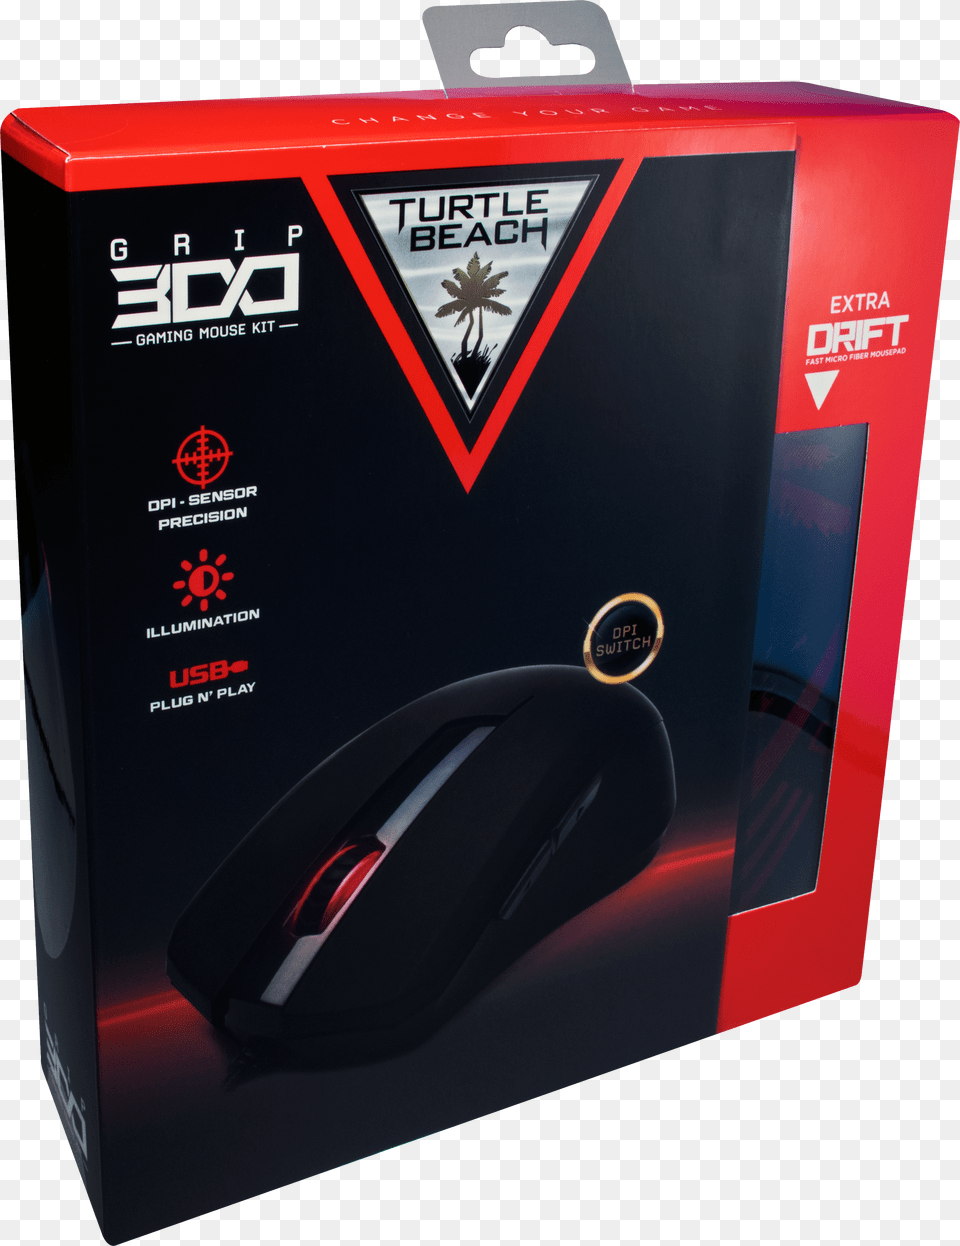 Turtle Beach Grip 300 Gaming Mouse Kit Free Png Download